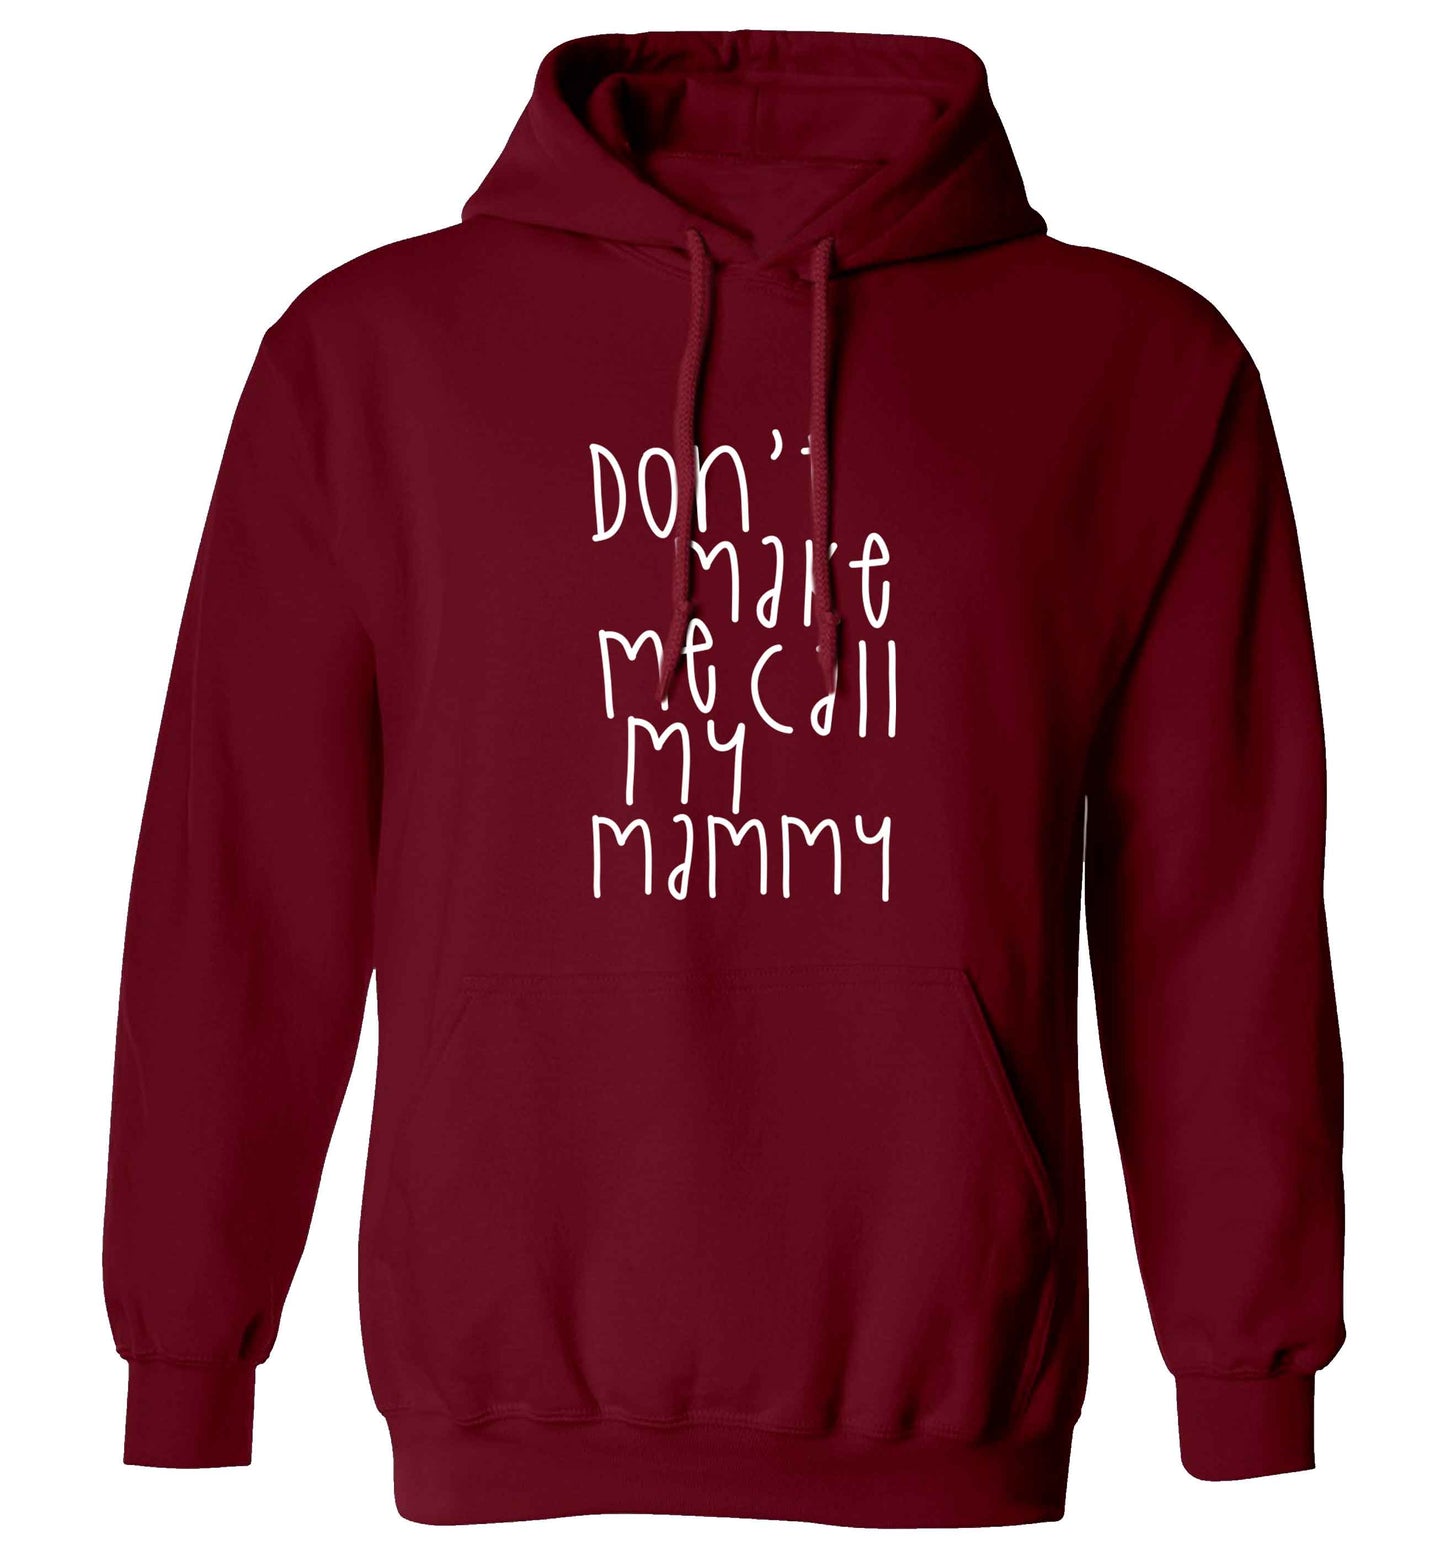 Don't make me call my mammy adults unisex maroon hoodie 2XL